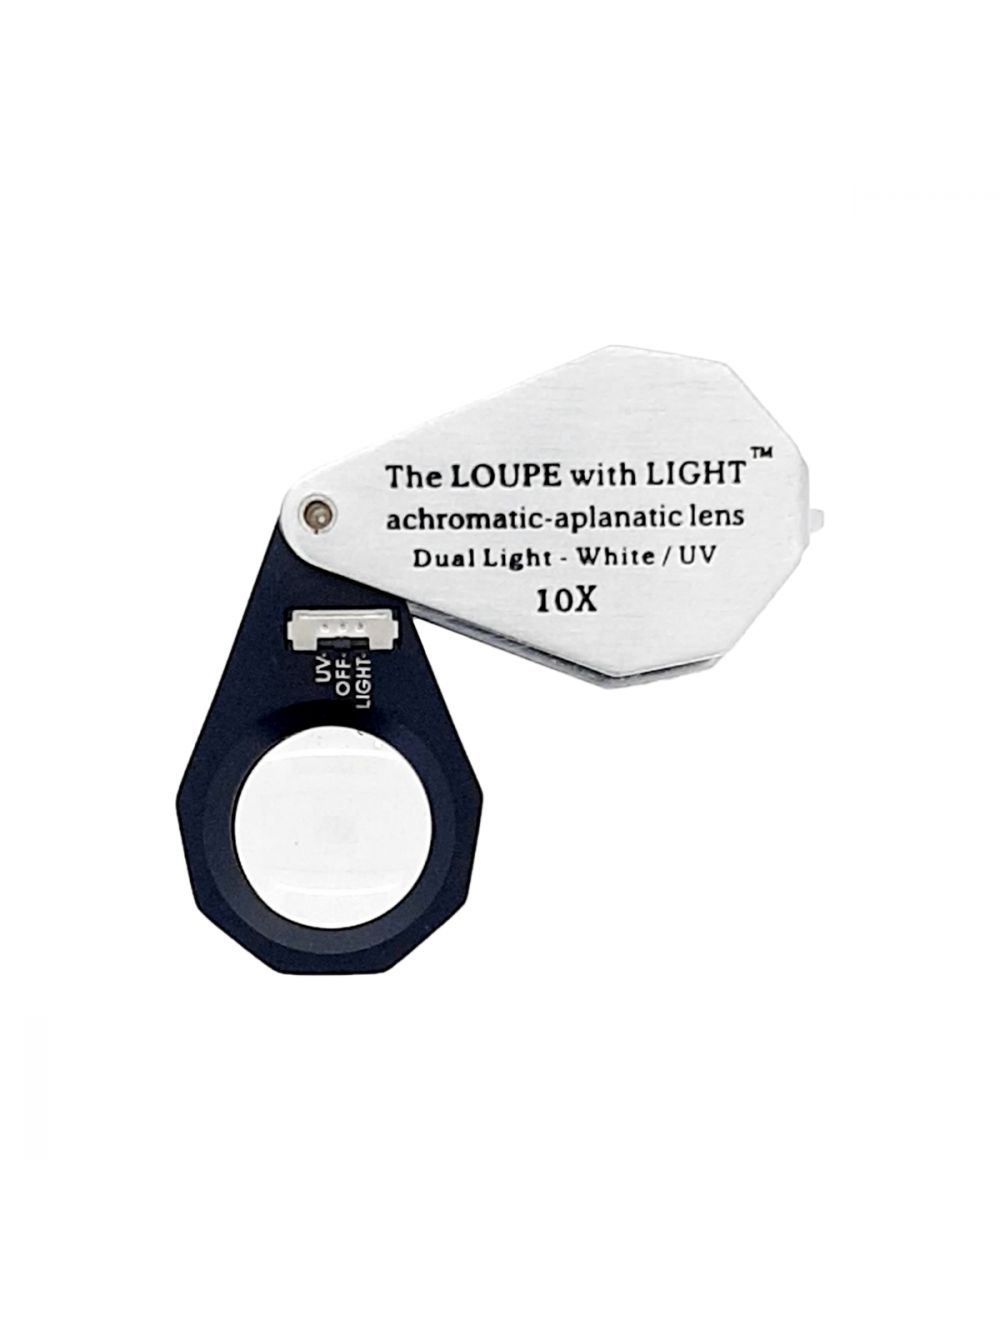 10X Jeweler's Loupe Magnifier with LED Light